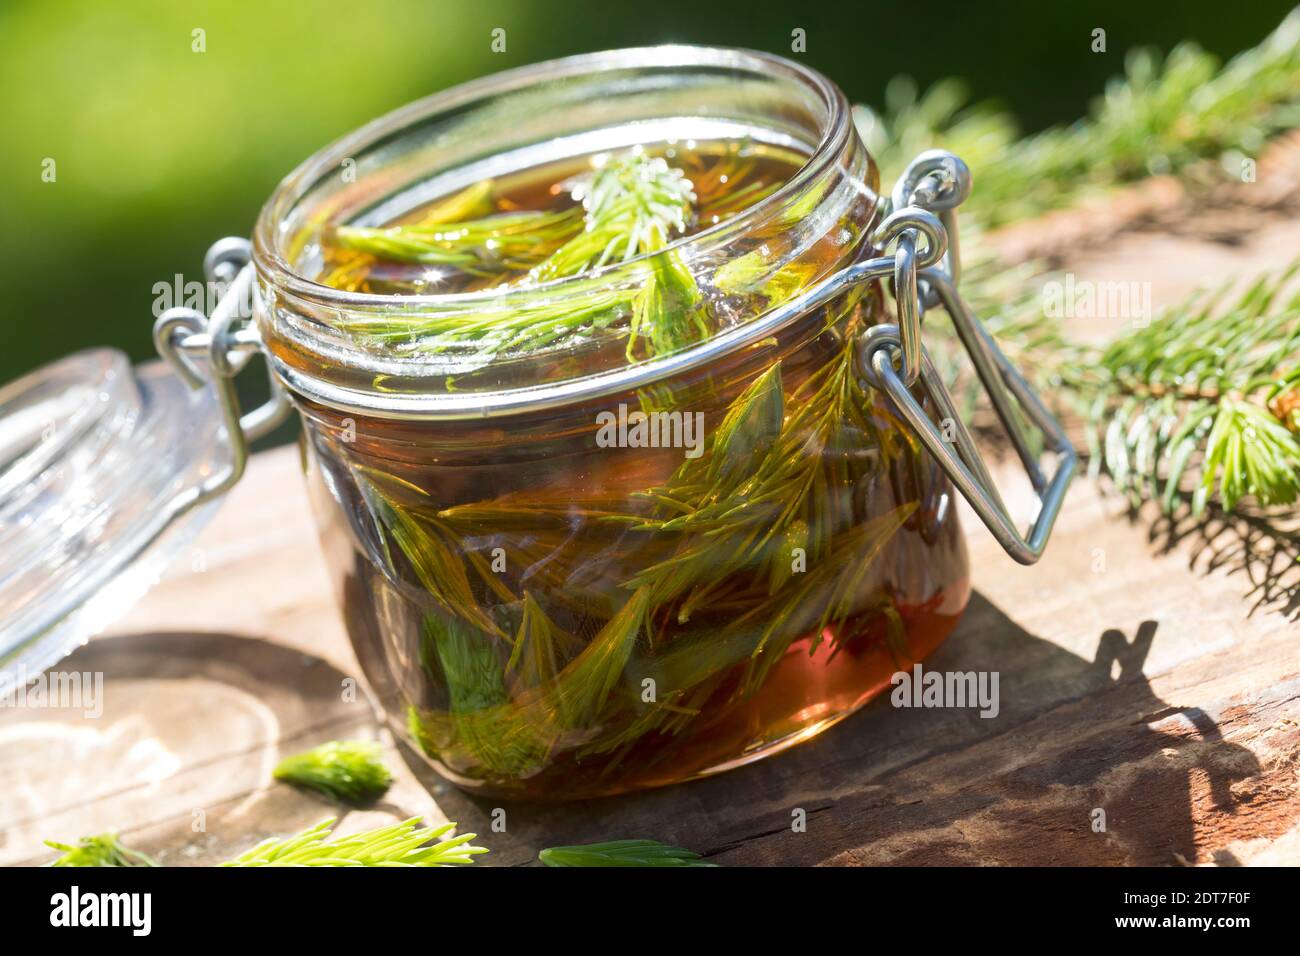 Norway spruce (Picea abies), making of cough linctus, freshly sprouted spruce shoots are pickled in honey, Germany Stock Photo